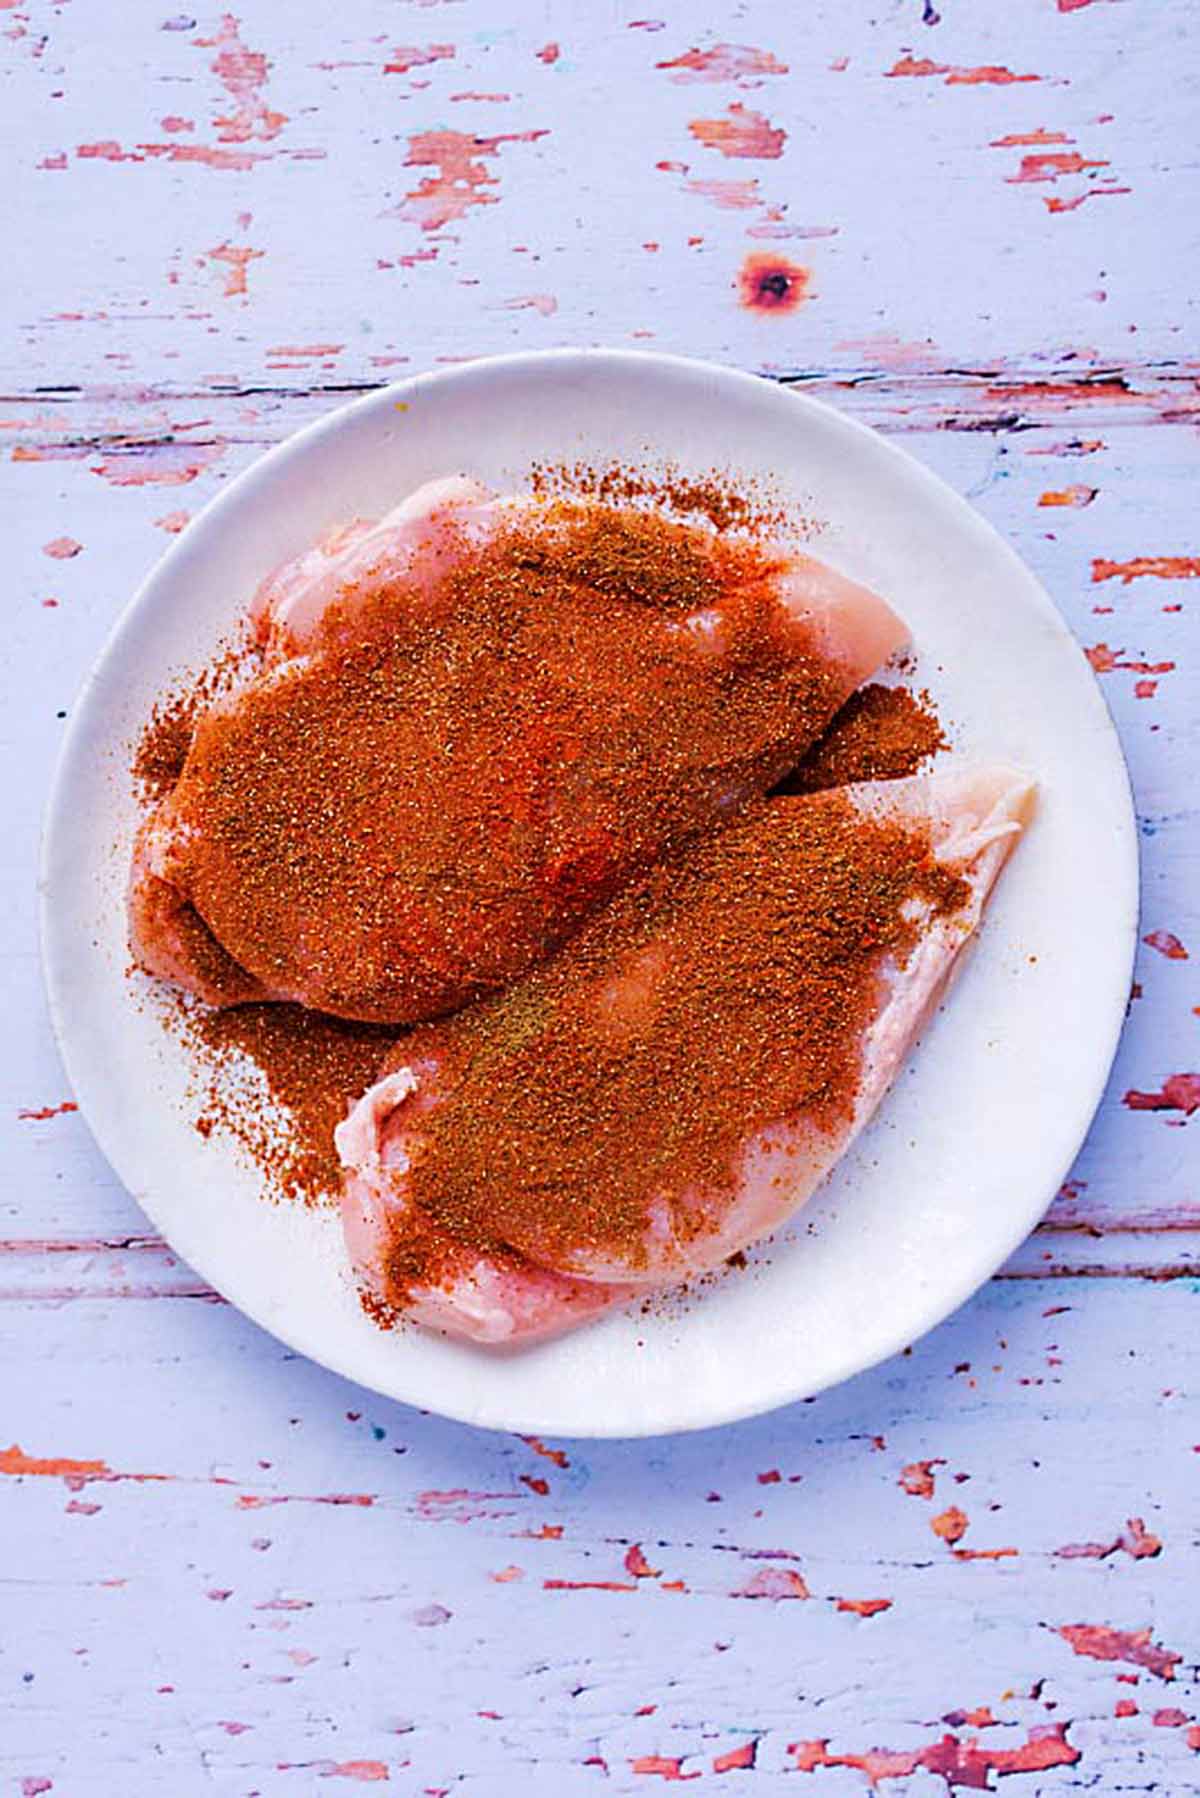 Two chicken breasts coated in Cajun seasoning on a plate.